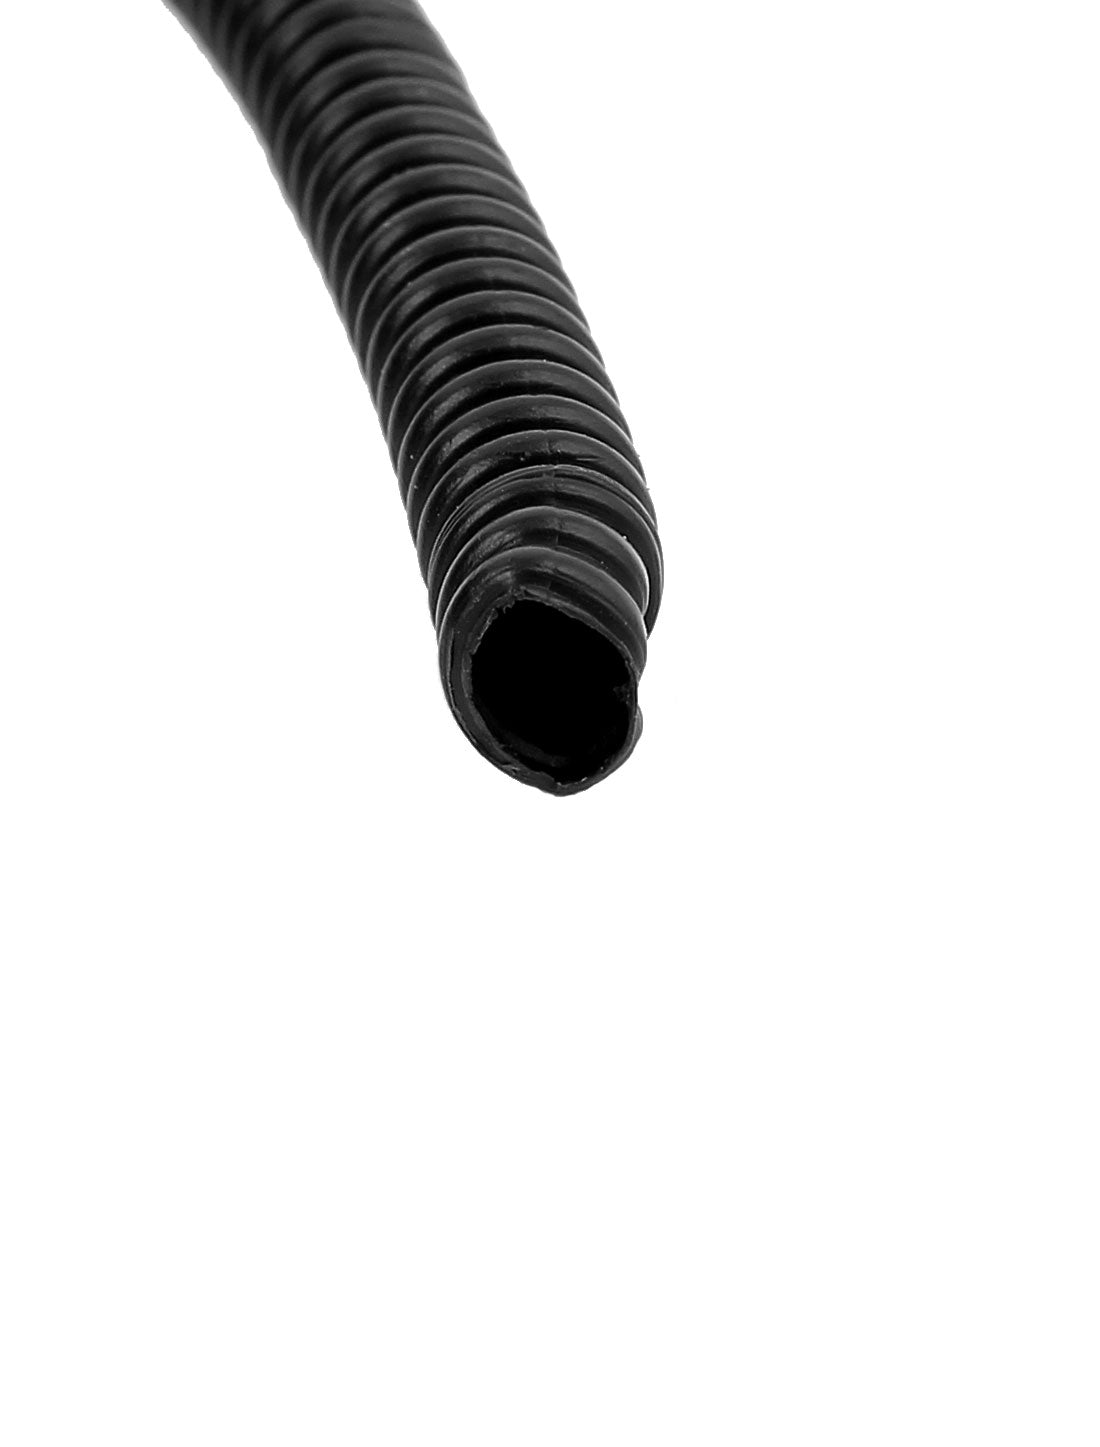 uxcell Uxcell 20.7 M 5 x 7 mm Plastic Flexible Corrugated Conduit Tube for Garden,Office Black